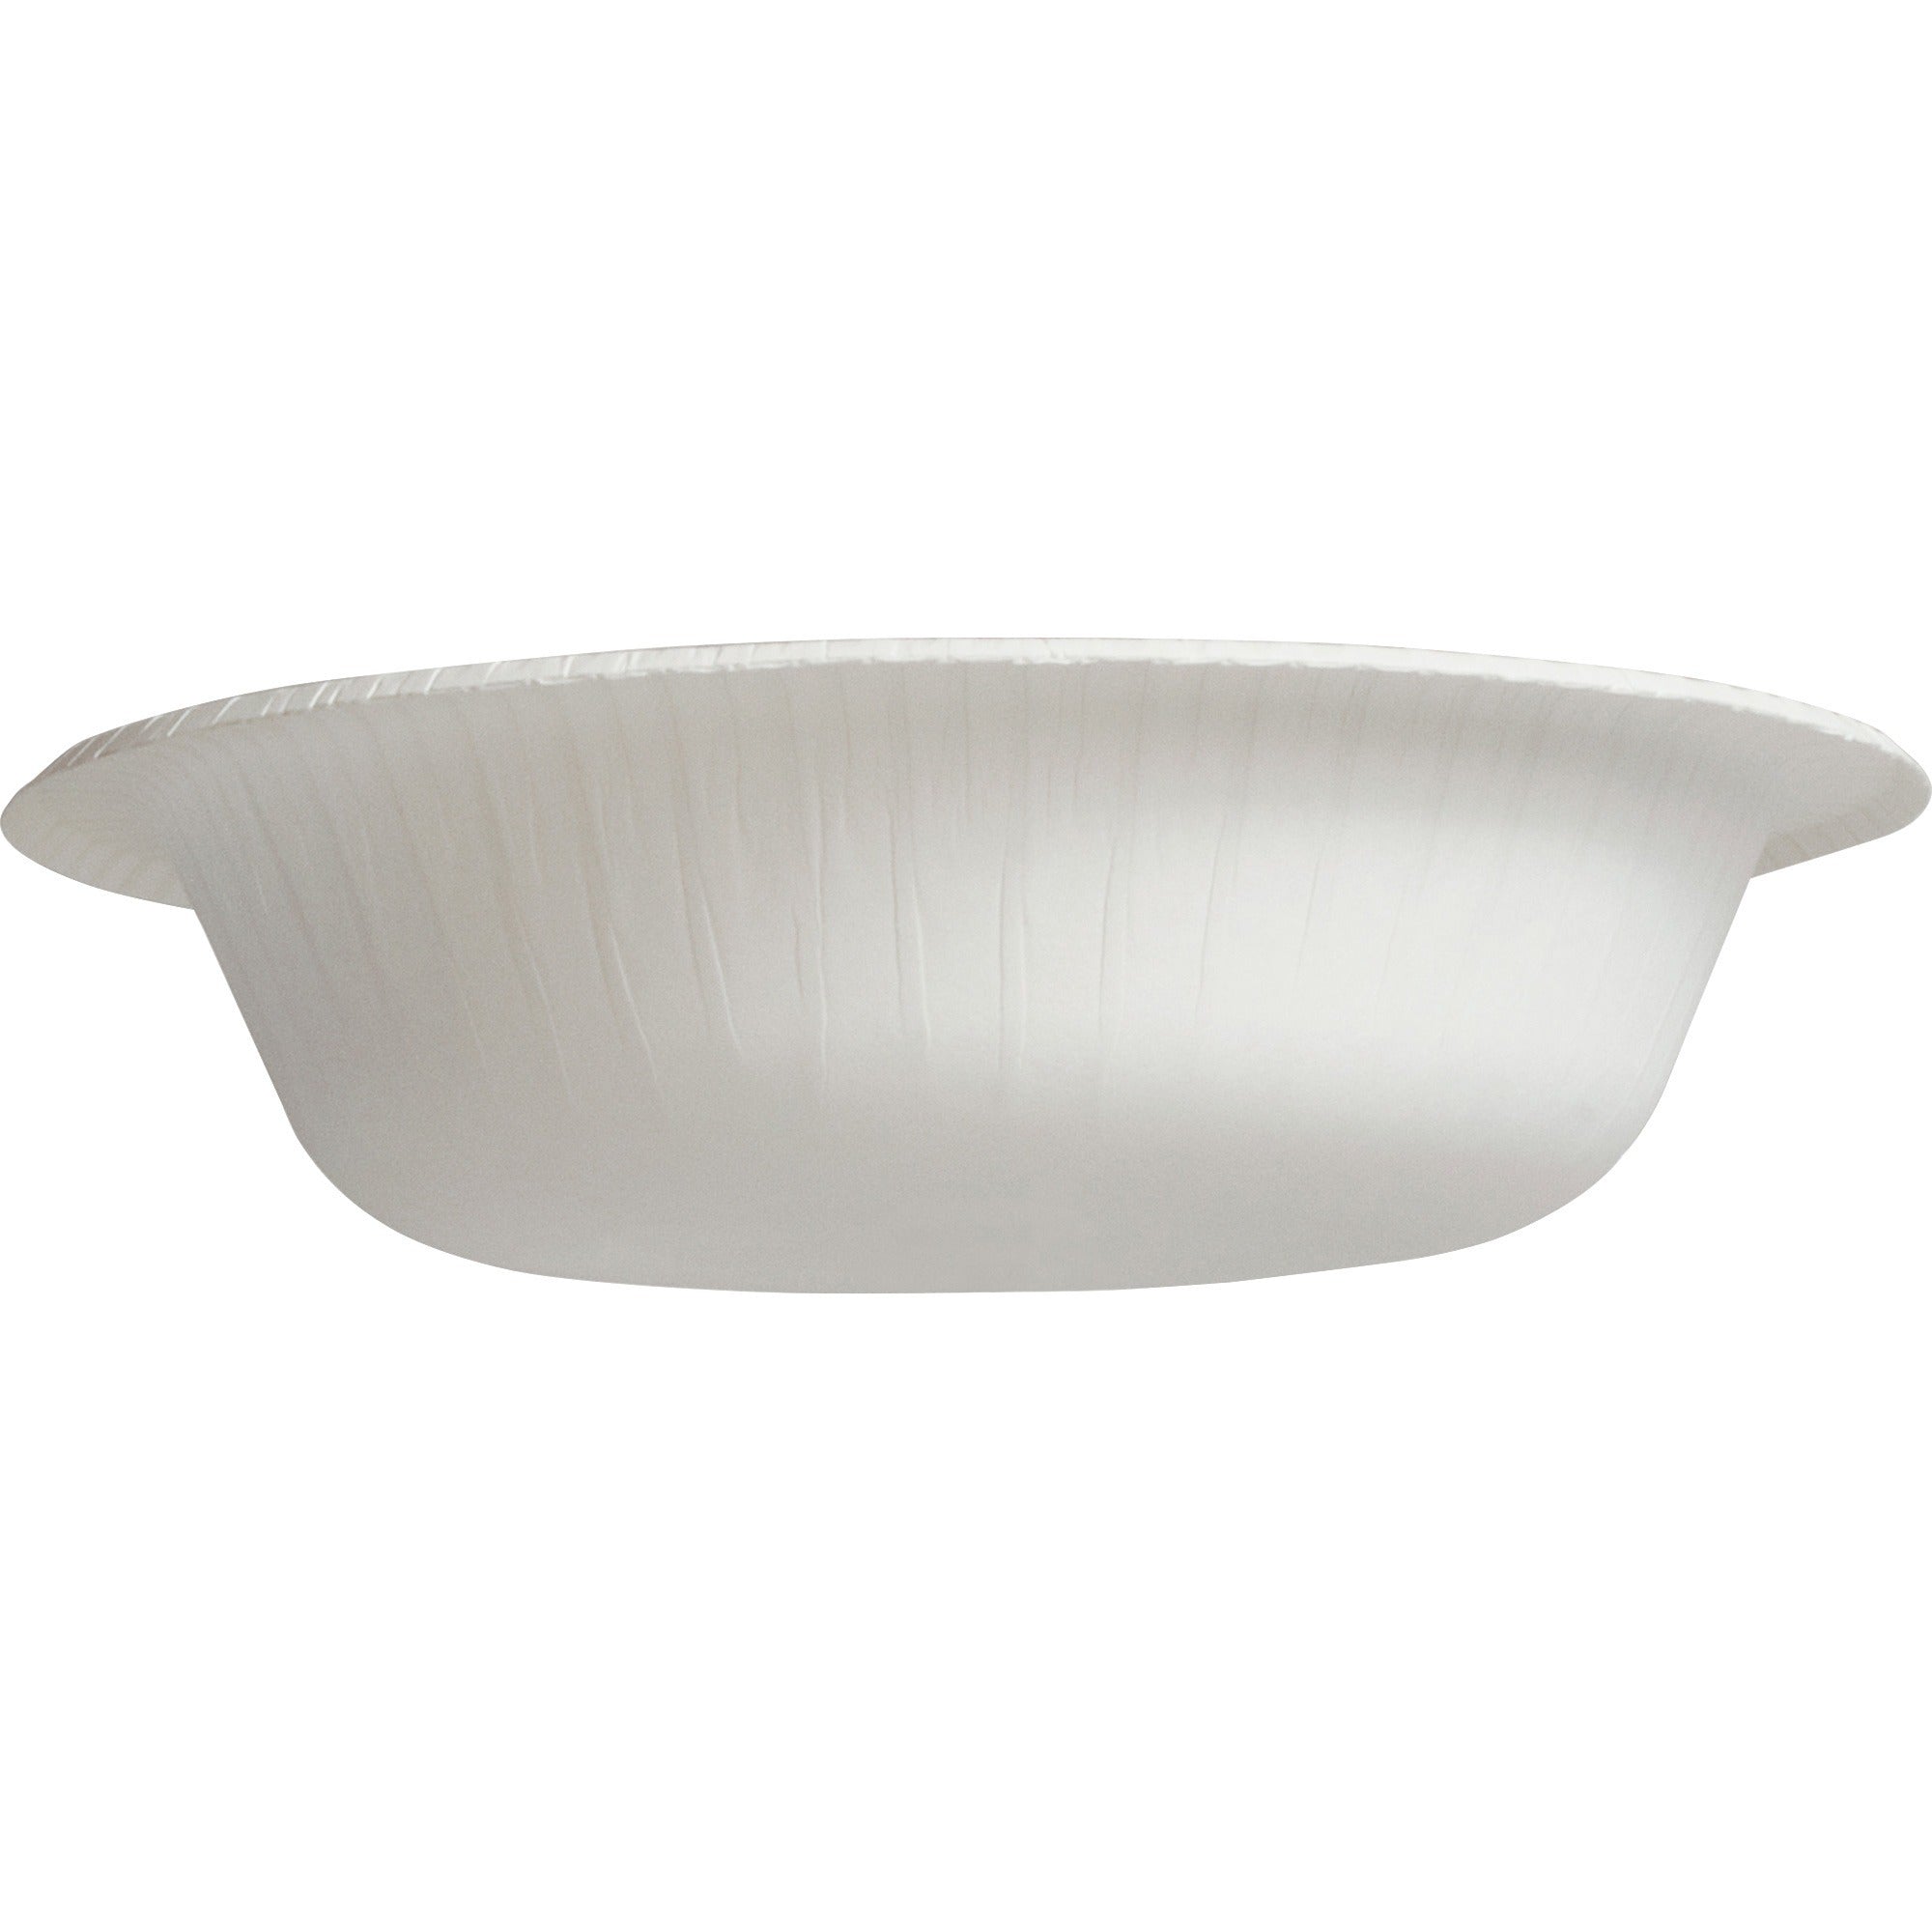 solo-bare-12-oz-heavyweight-paper-bowls-bare-disposable-white-paper-body-125-pack_scchb12bj7234 - 2